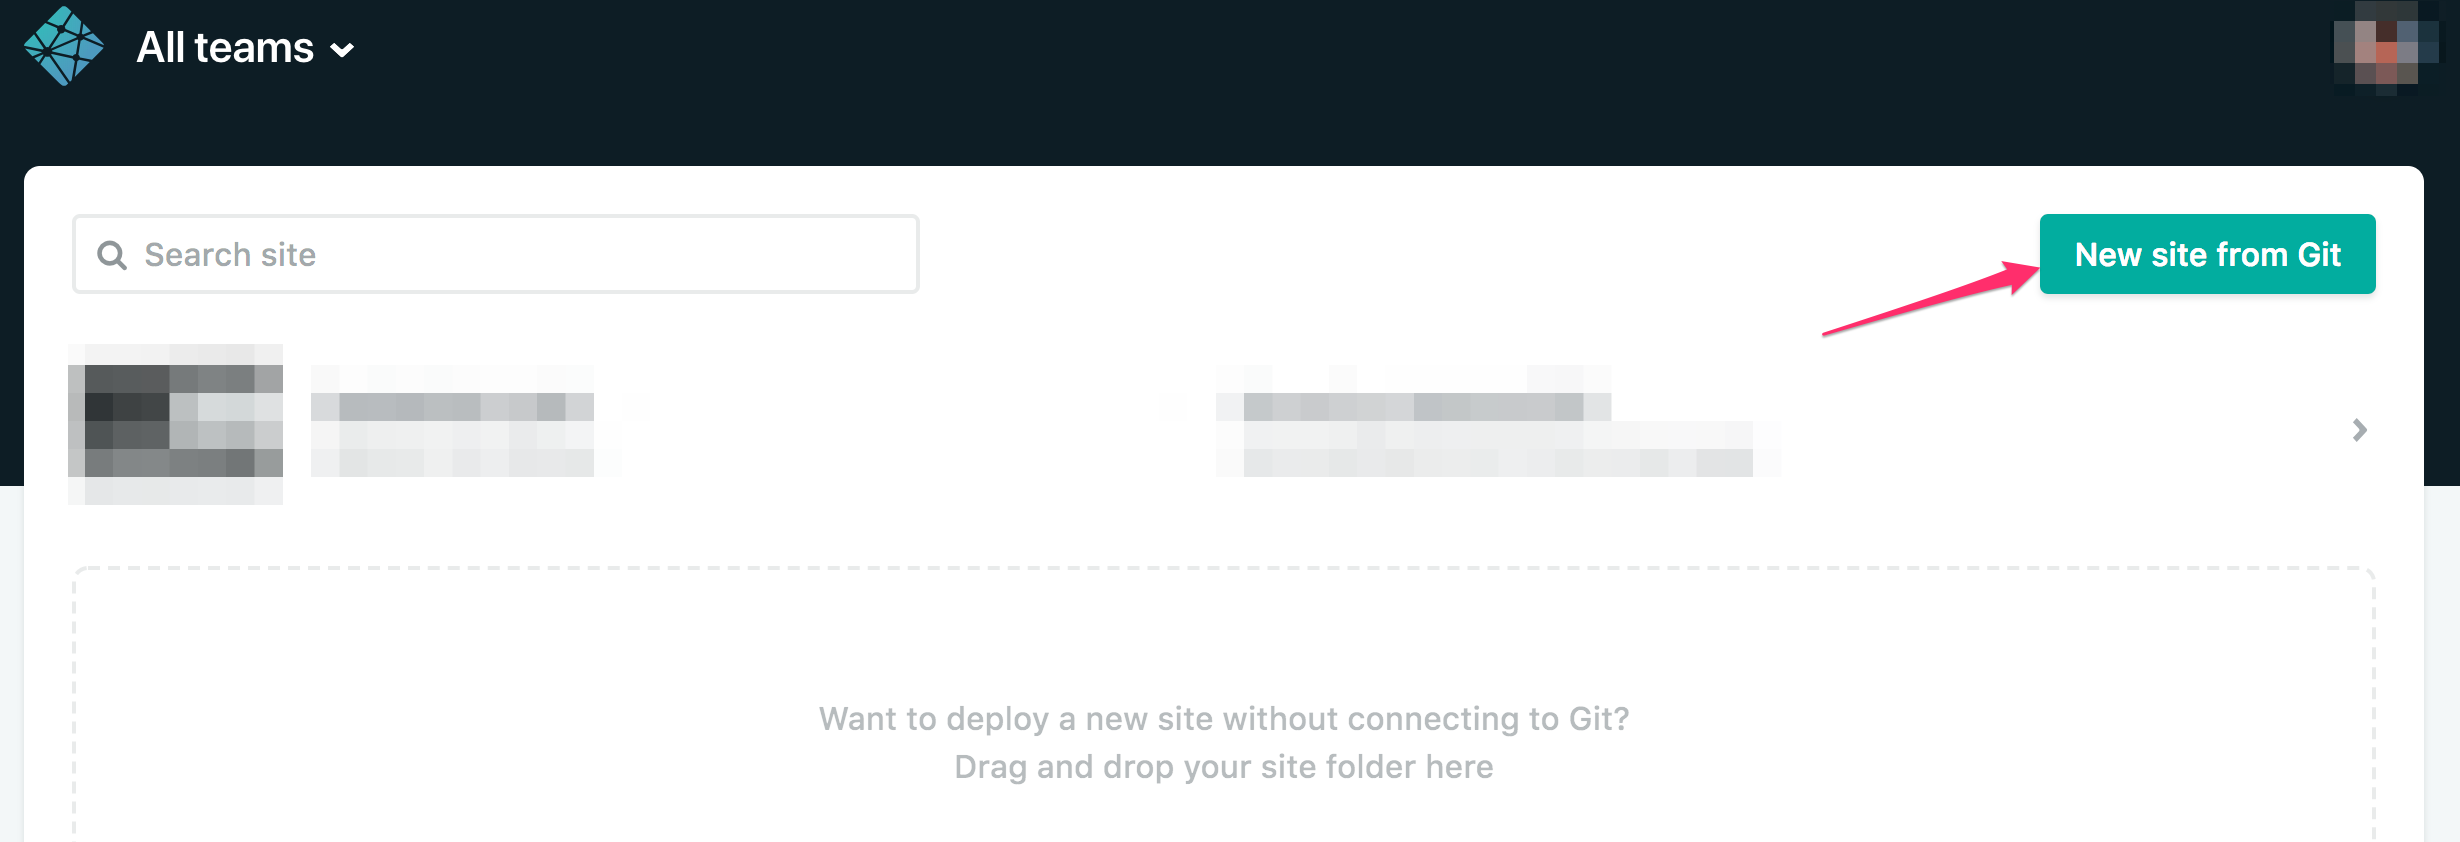 netlify New site from Git